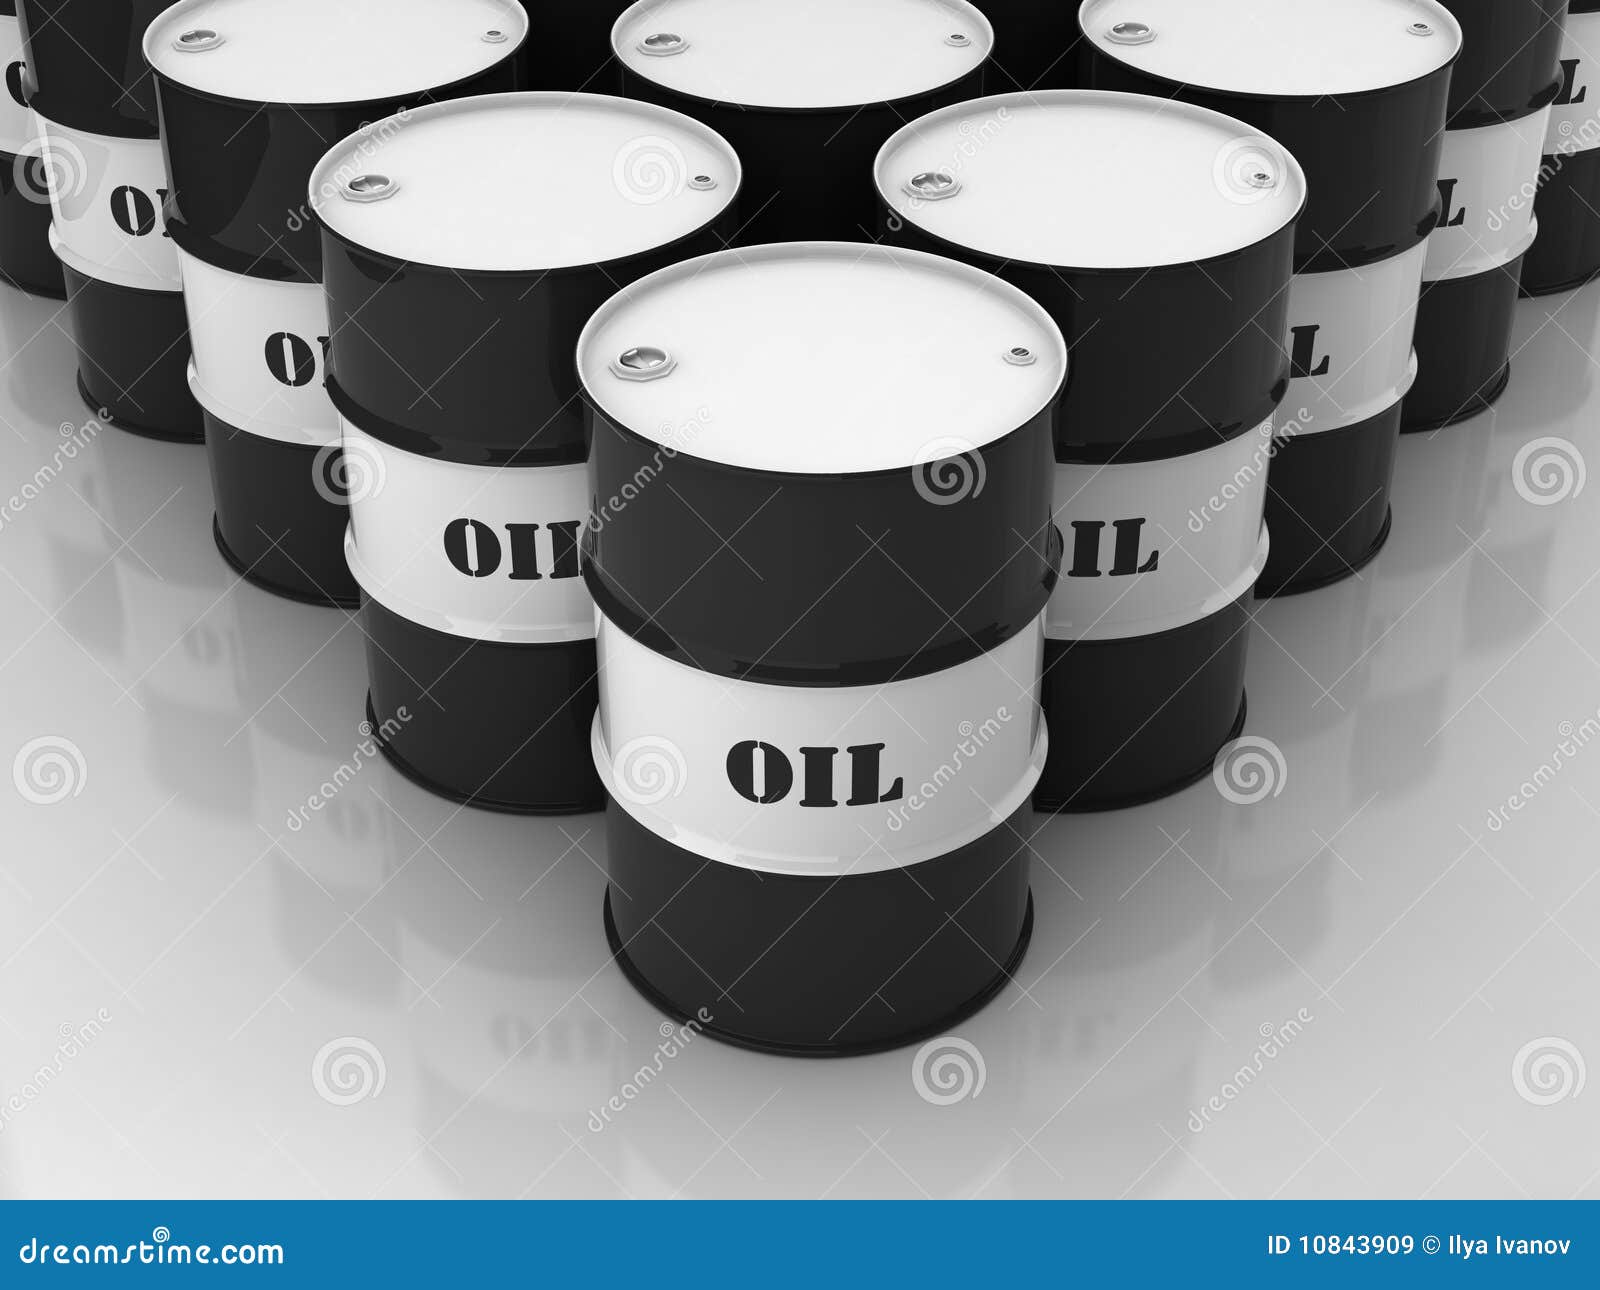 Black and white barrels with mark OIL stacked in form of rhomb